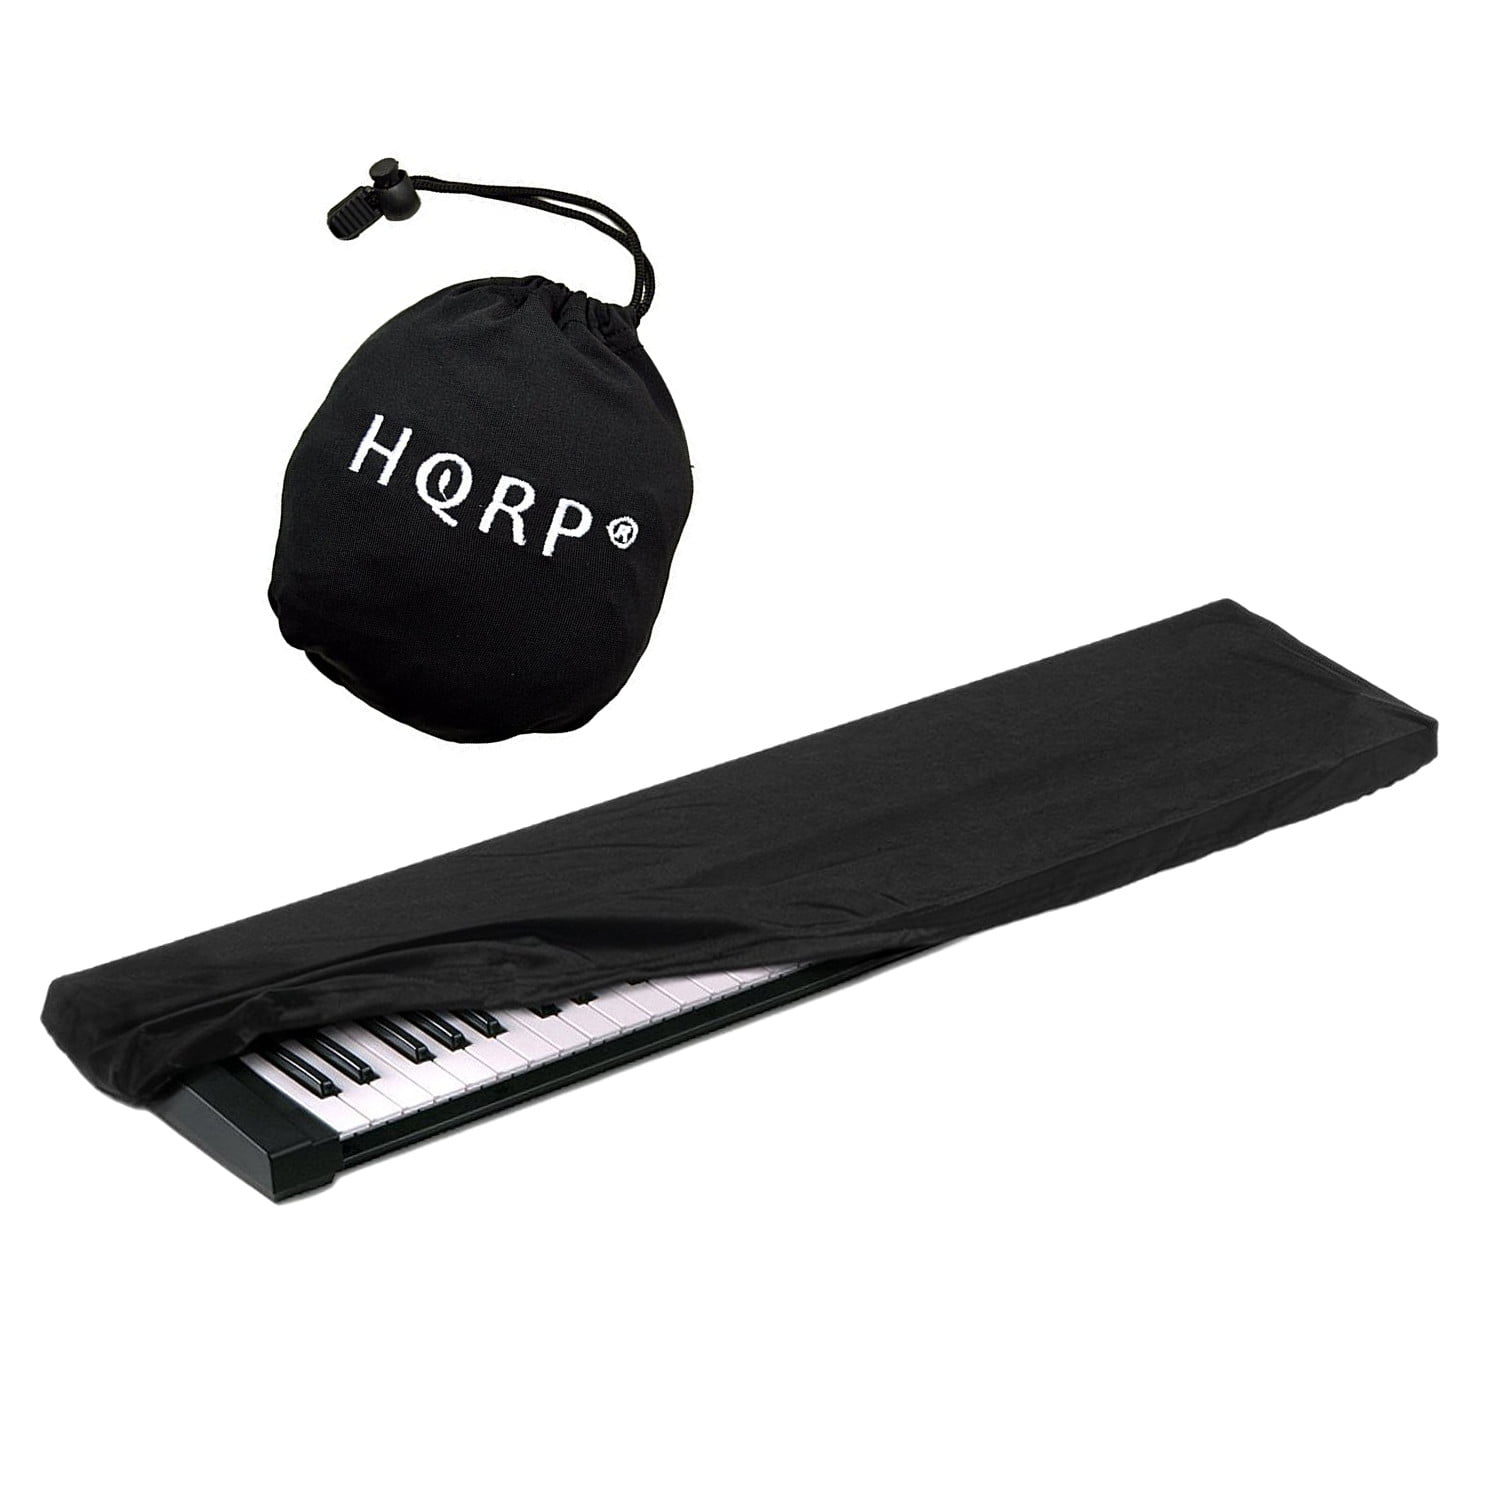 Roland Consoles and more 61-76 Keys Yamaha Casio Stretchable Dust Protector Cover for Electronic Keyboard Keyboard Accessories Piano Keyboard Dust Cover Digital Piano